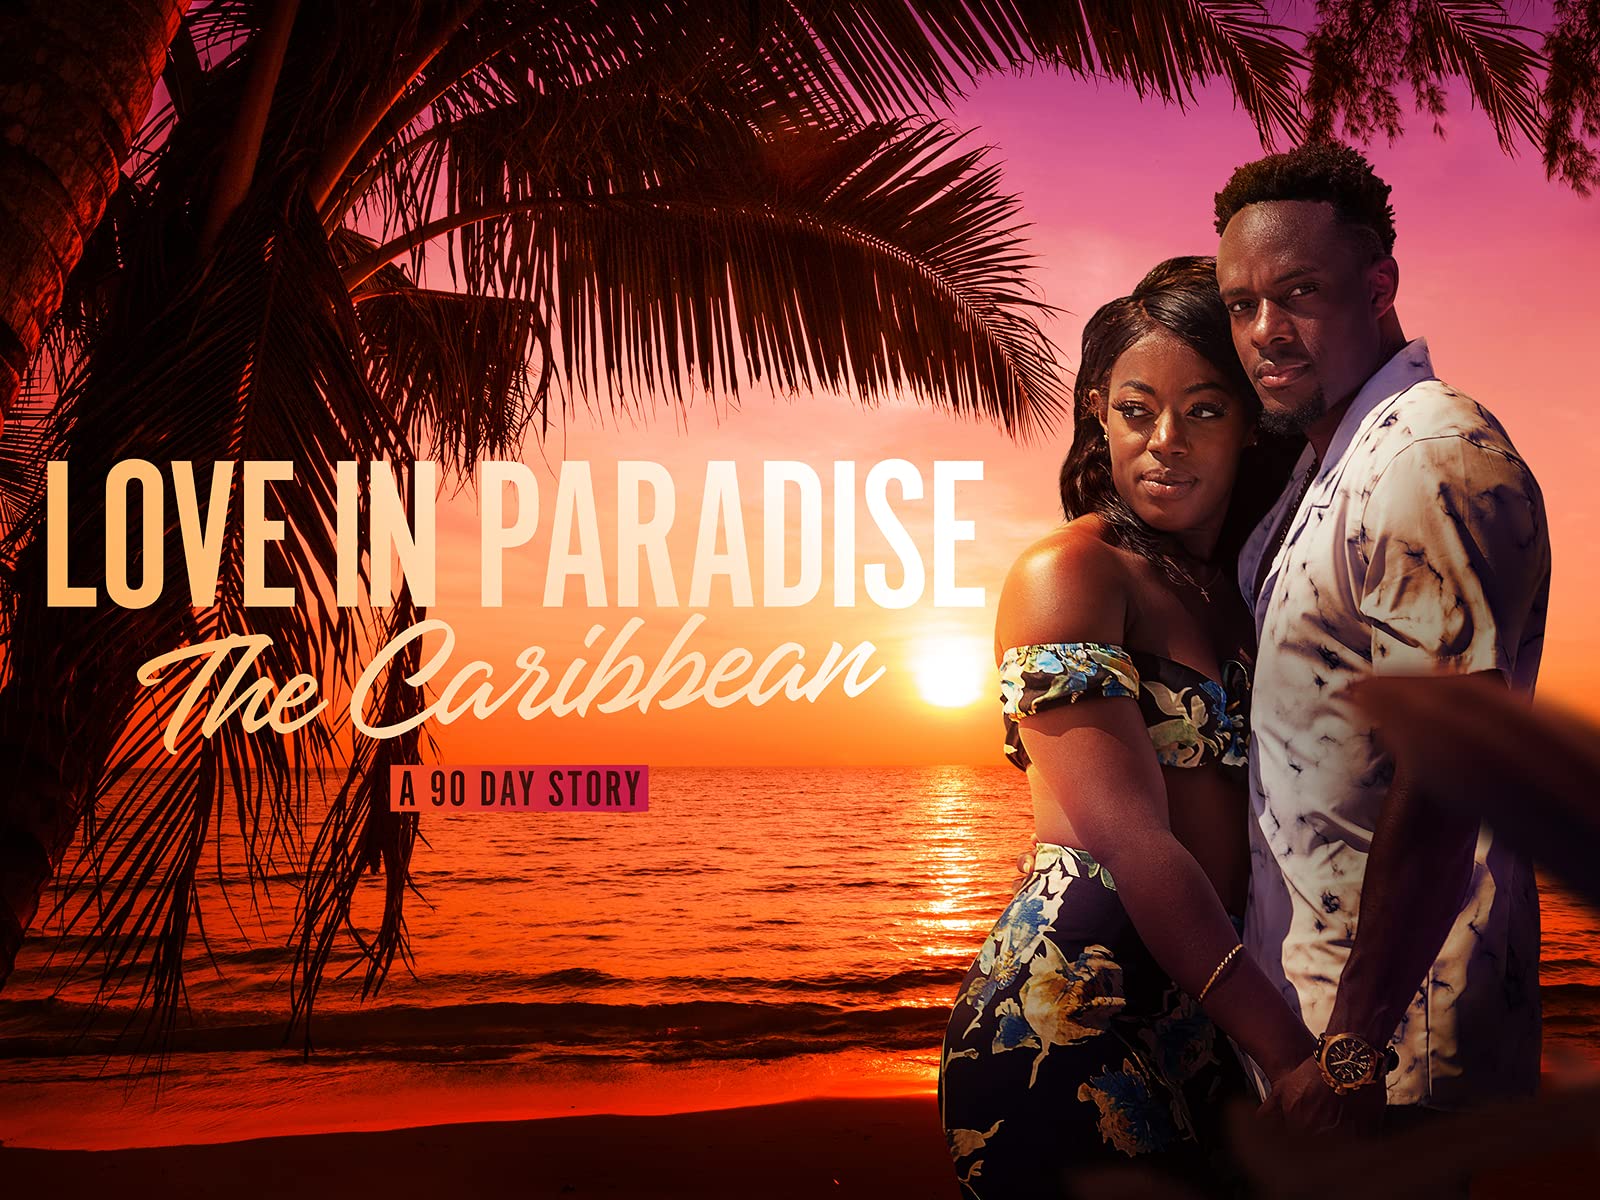 Watch Love in Paradise: The Caribbean, A 90 Day Story - Season 1